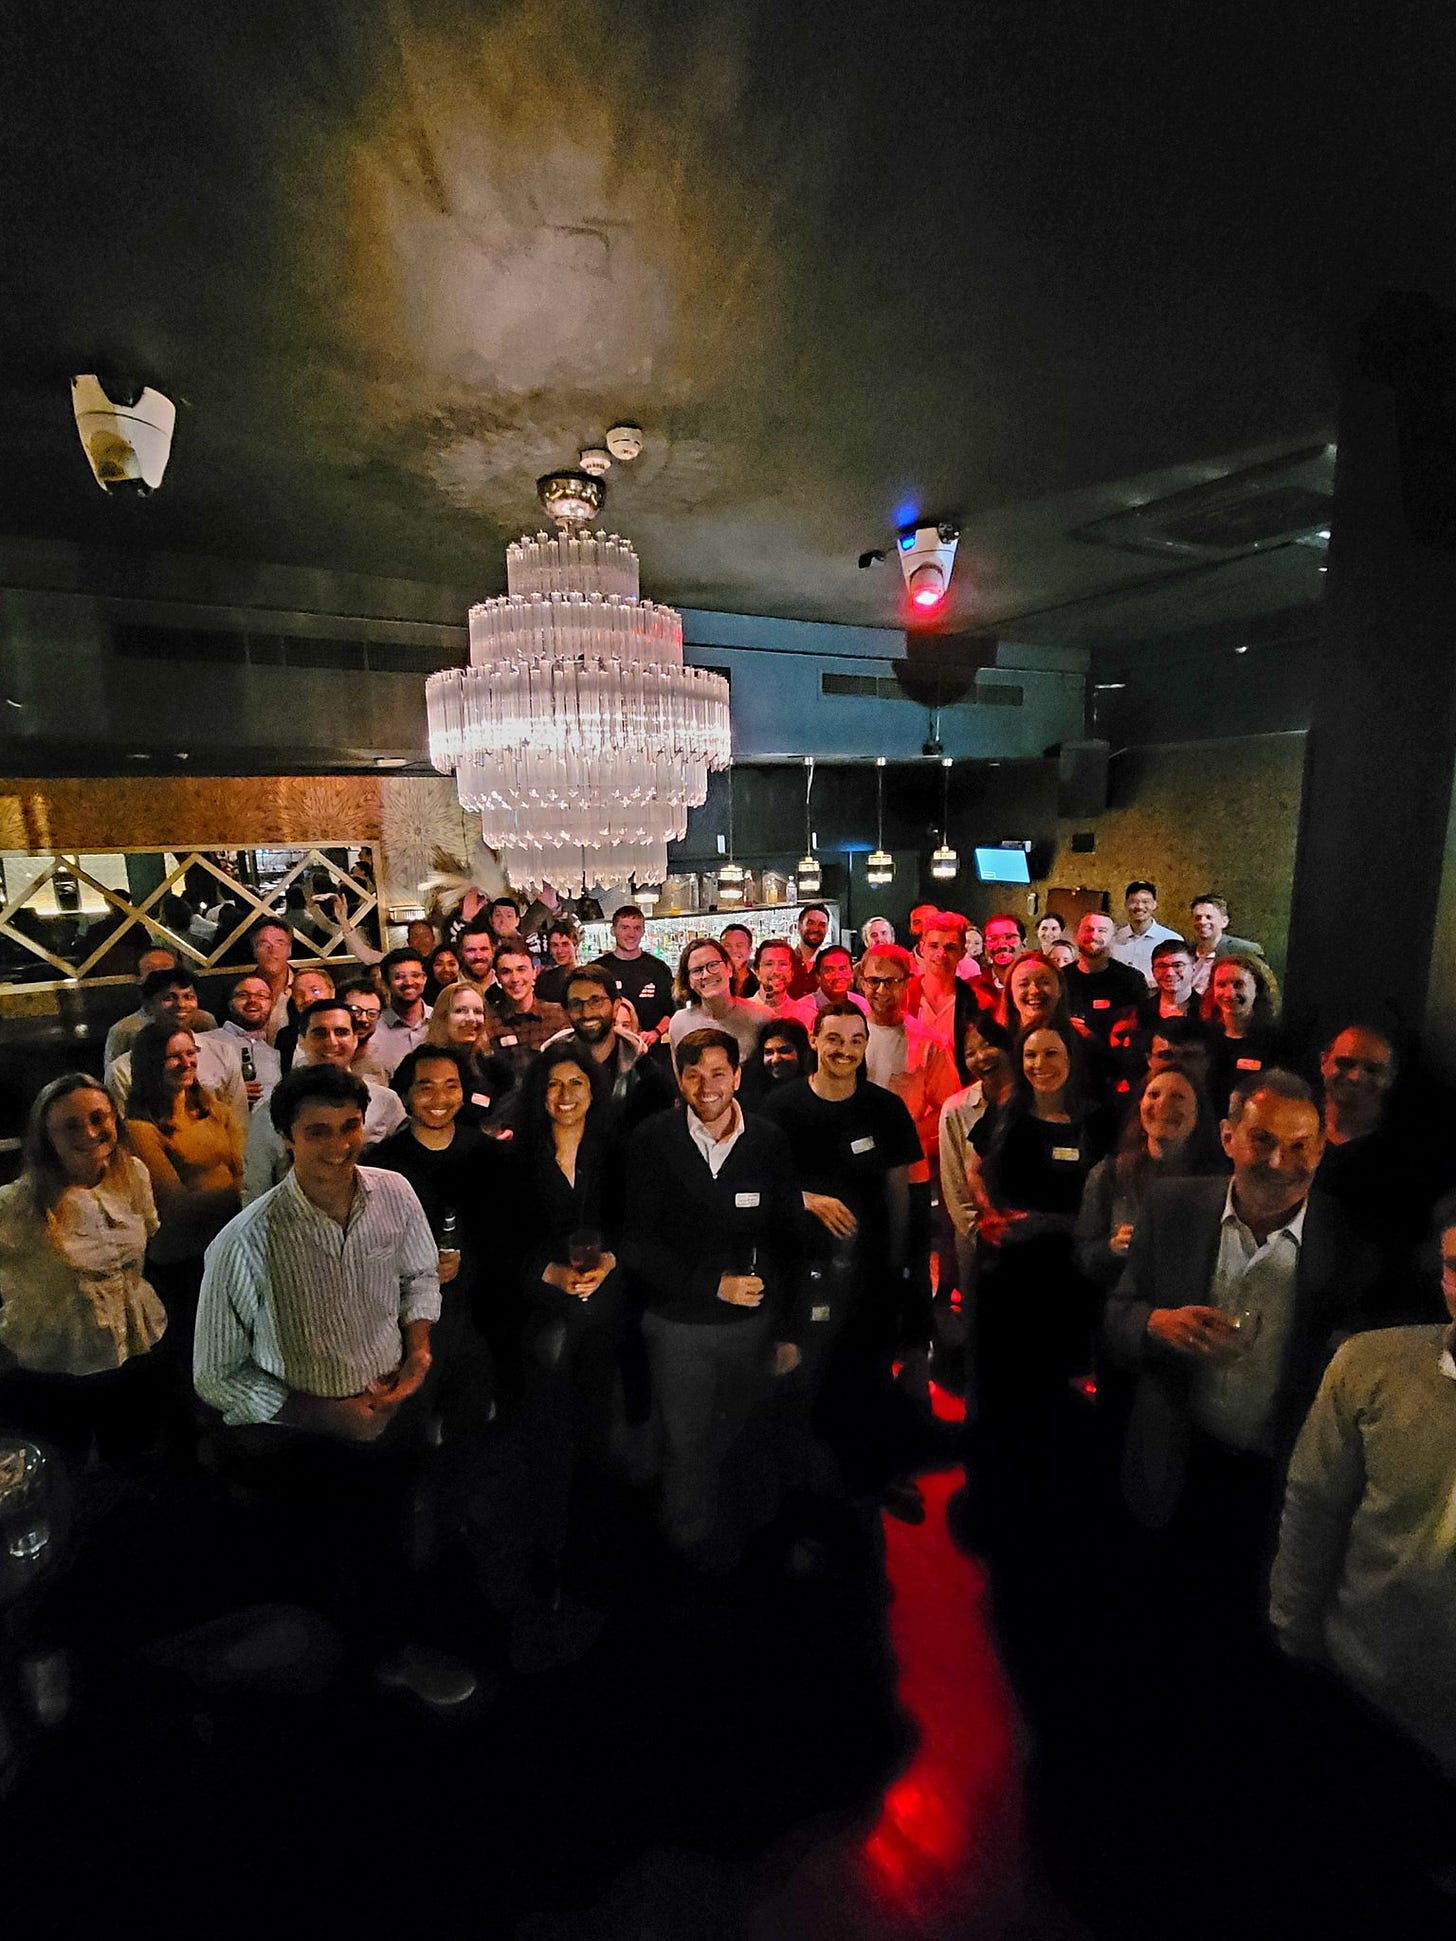 Group photo at meetup event in london